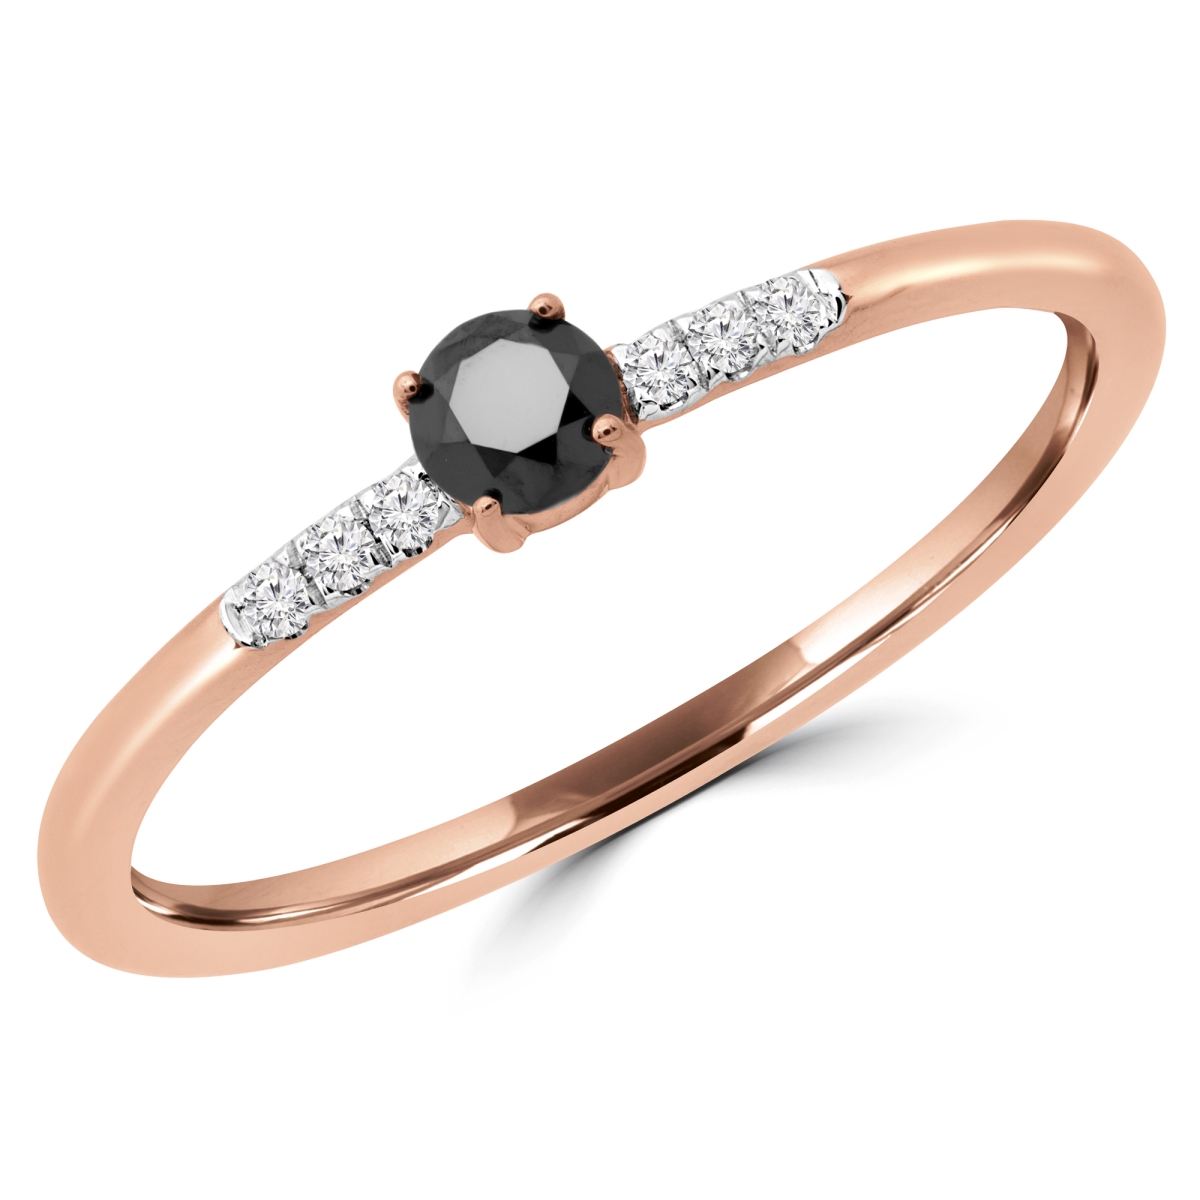 Picture of Majesty Diamonds MDR190079-7.75 0.16 CTW Round Black Diamond Bezel Set Cocktail Ring in 14K Rose Gold - Size 7.75